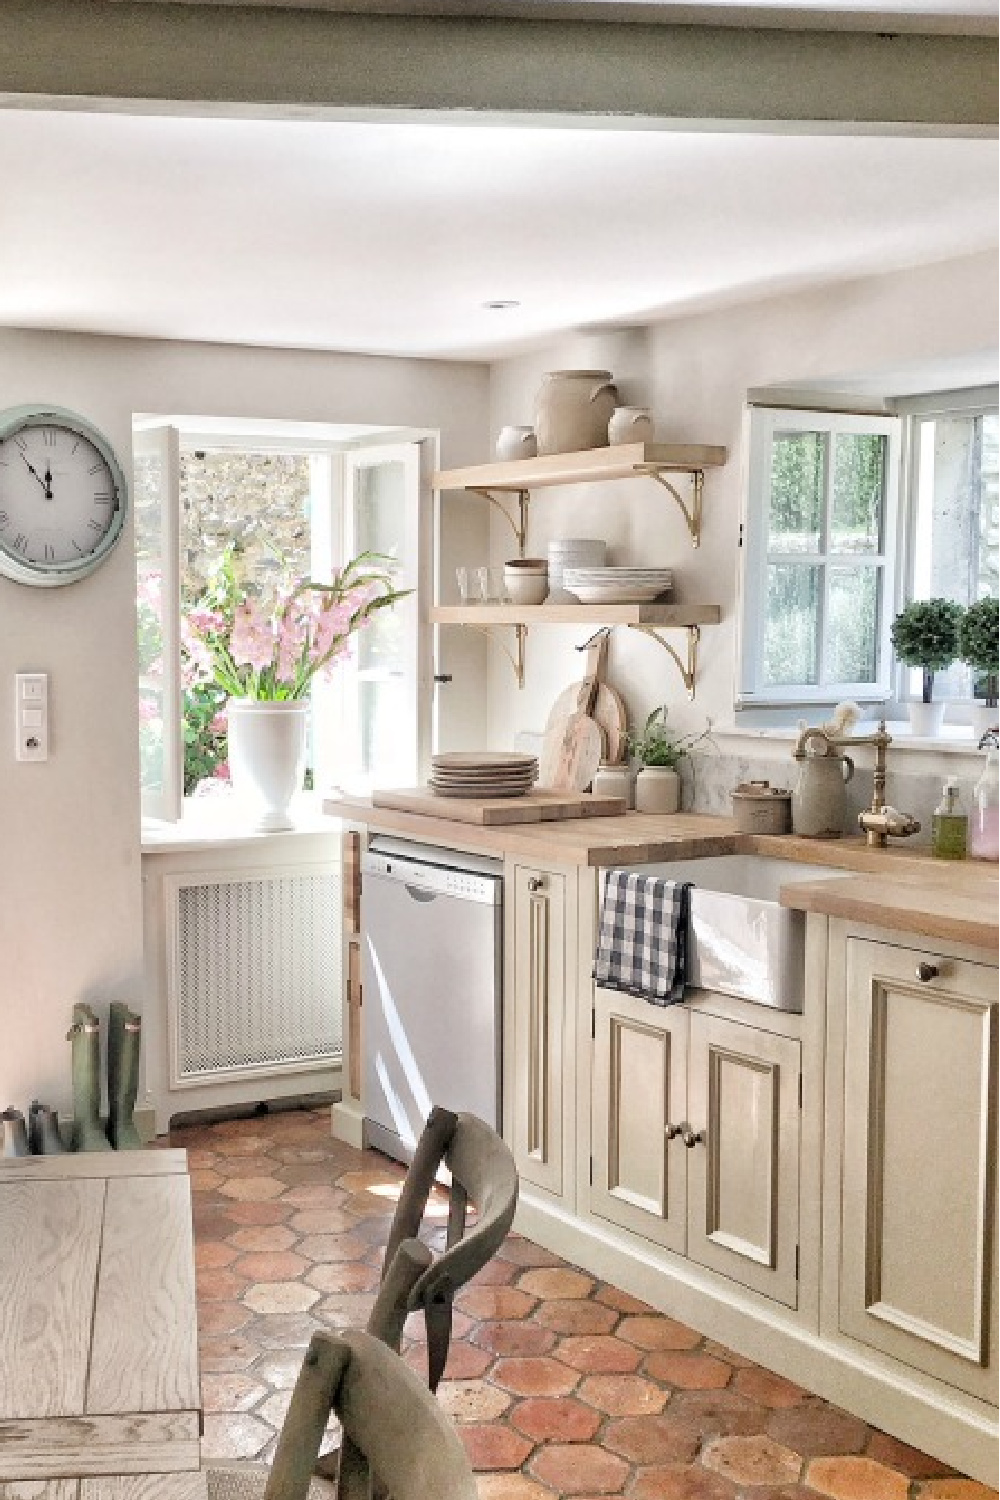 19 French Farmhouse Kitchens & Ideas to Get the Look! - Hello Lovely